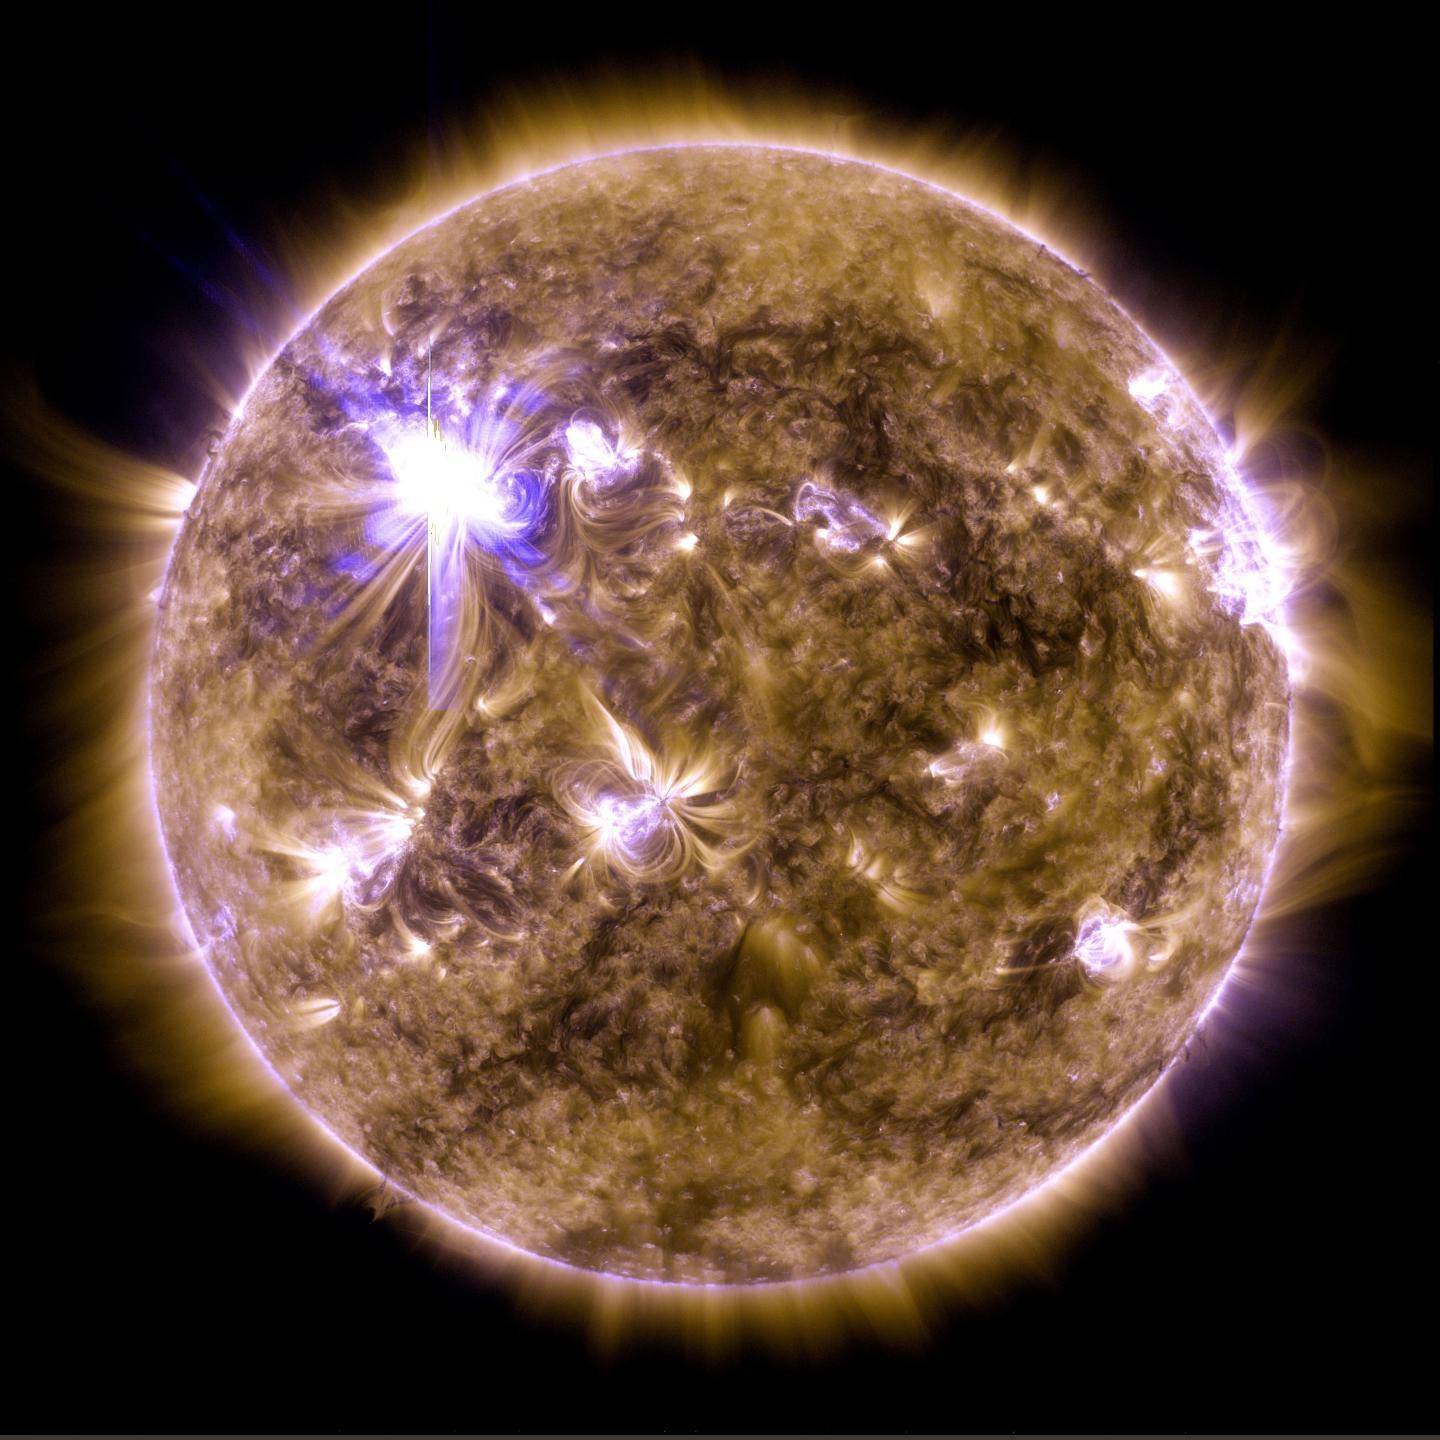 An X-class solar flare flashes on the edge of the Sun on March 7, 2012. This image was captured by NASA's Solar Dynamics Observatory and shows a type of light that is invisible to human eyes, called extreme ultraviolet light.